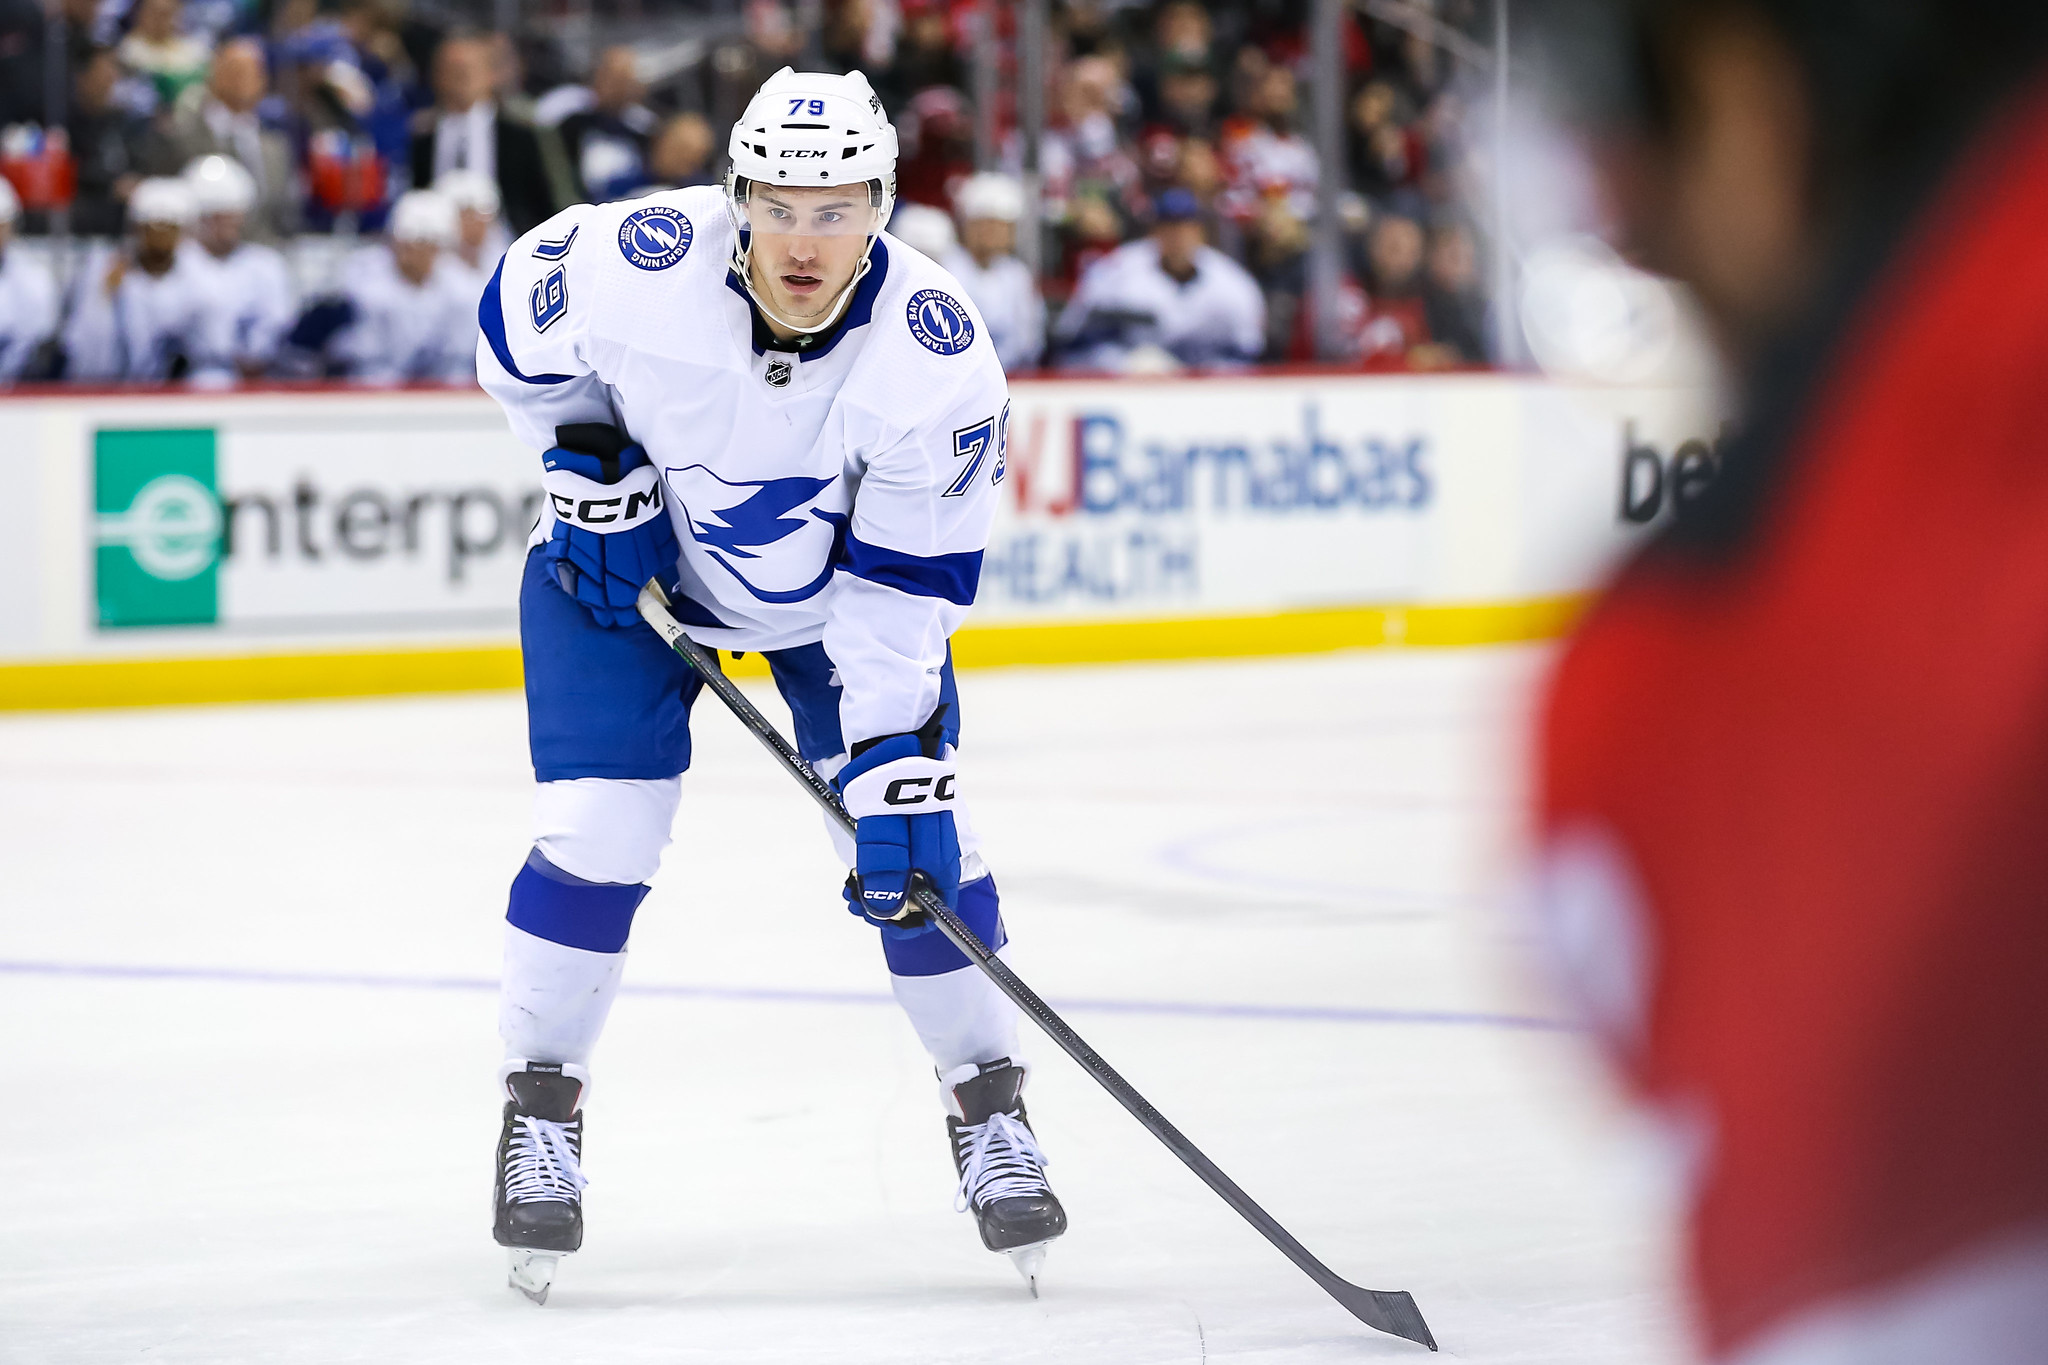 Lightning's Ross Colton, a NJ native, will try to end Rangers' season